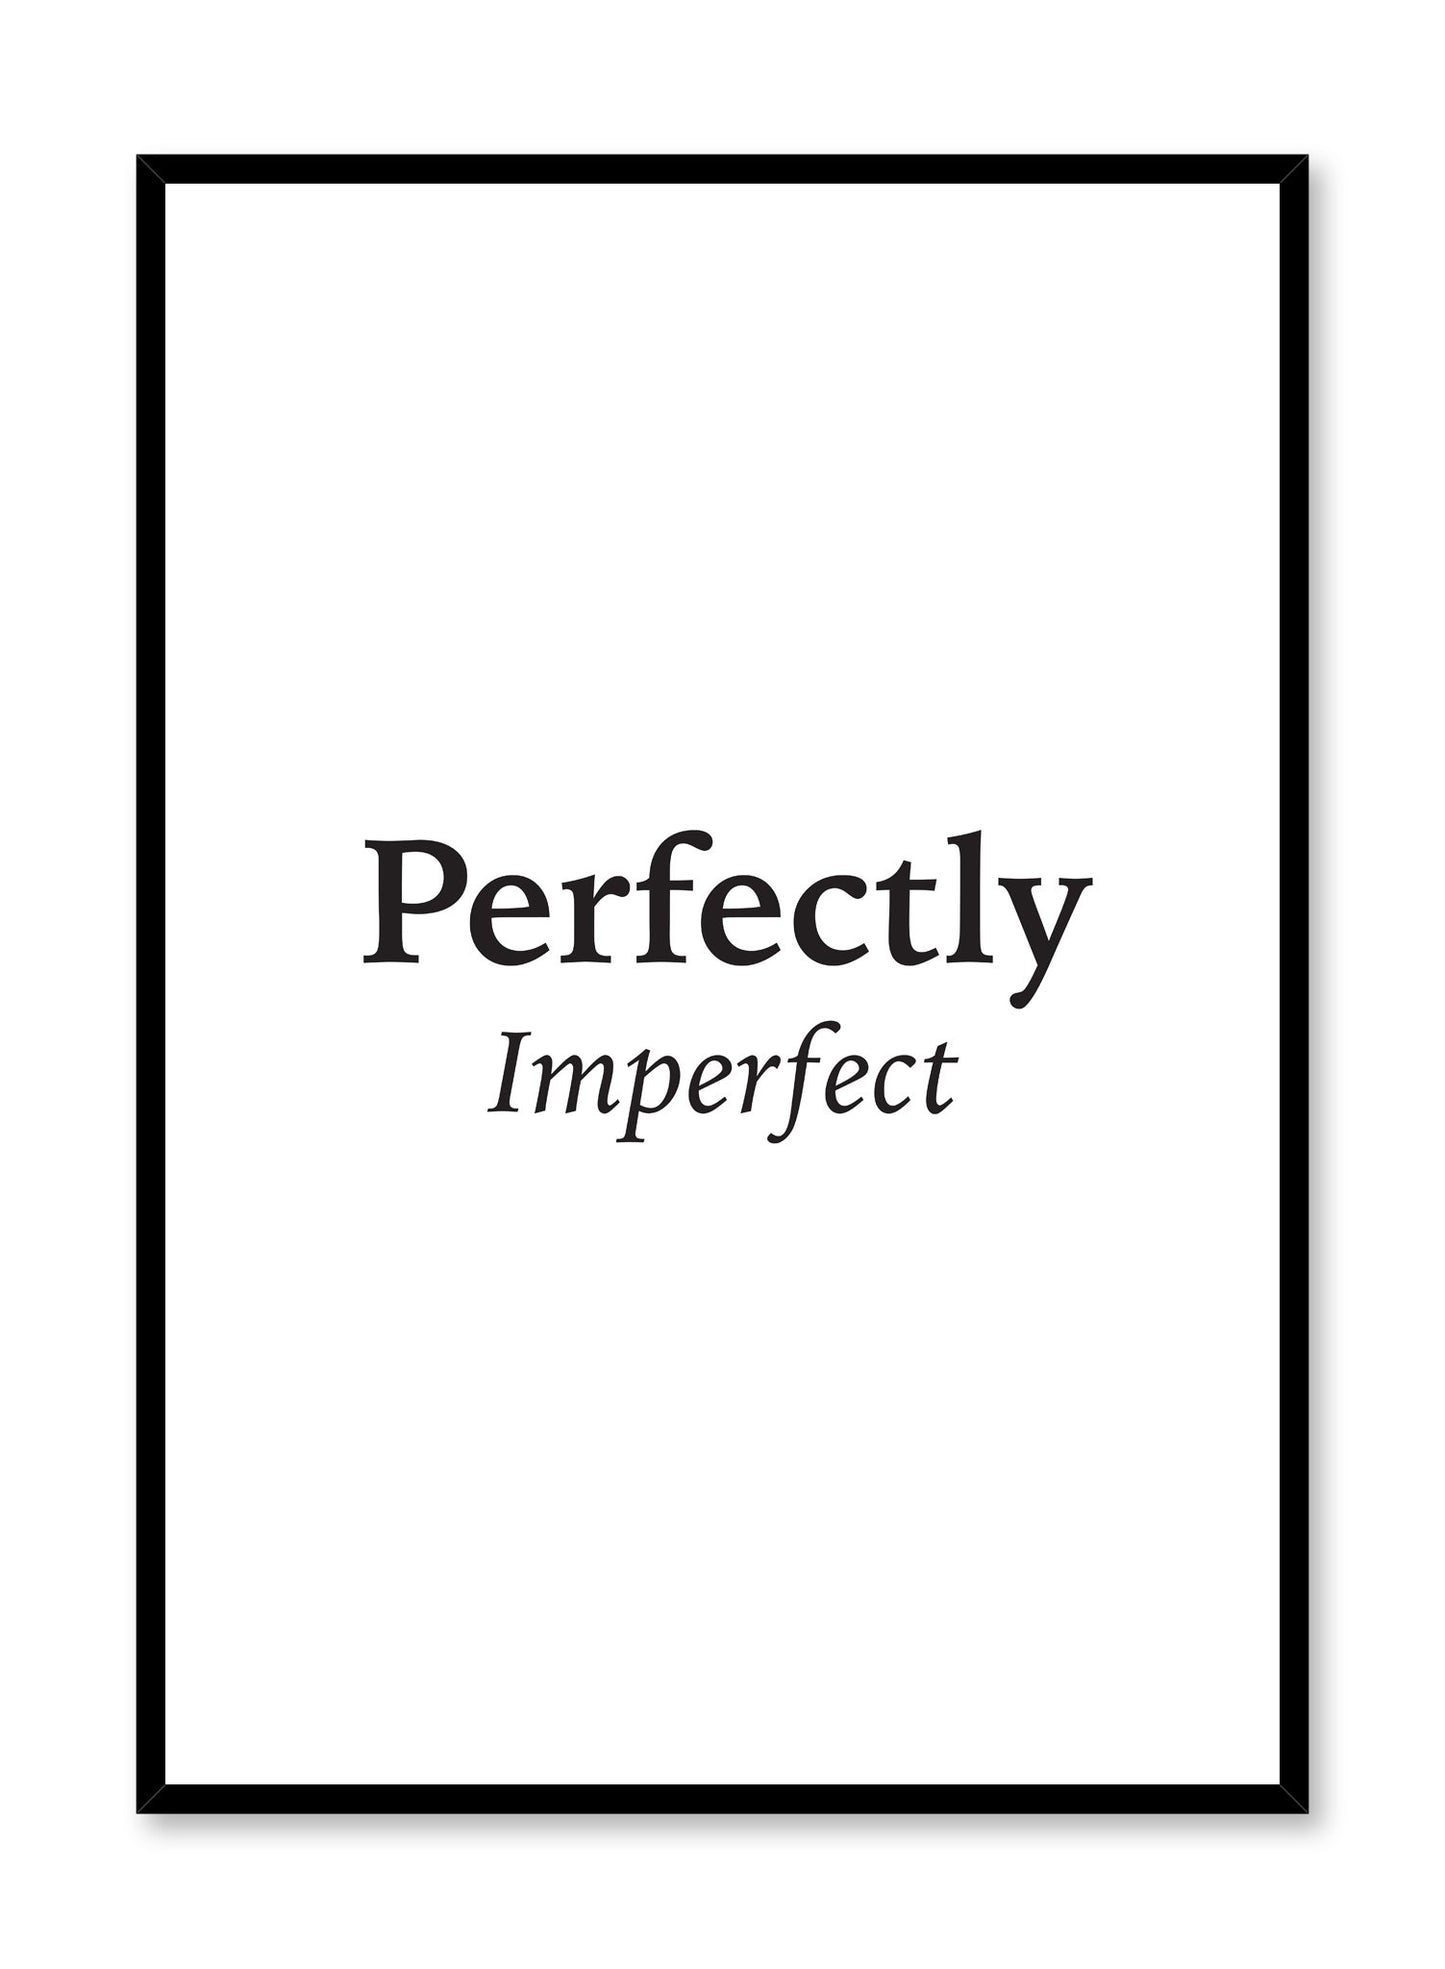 Scandinavian poster with black and white graphic typography design of Perfectly Imperfect by Opposite Wall